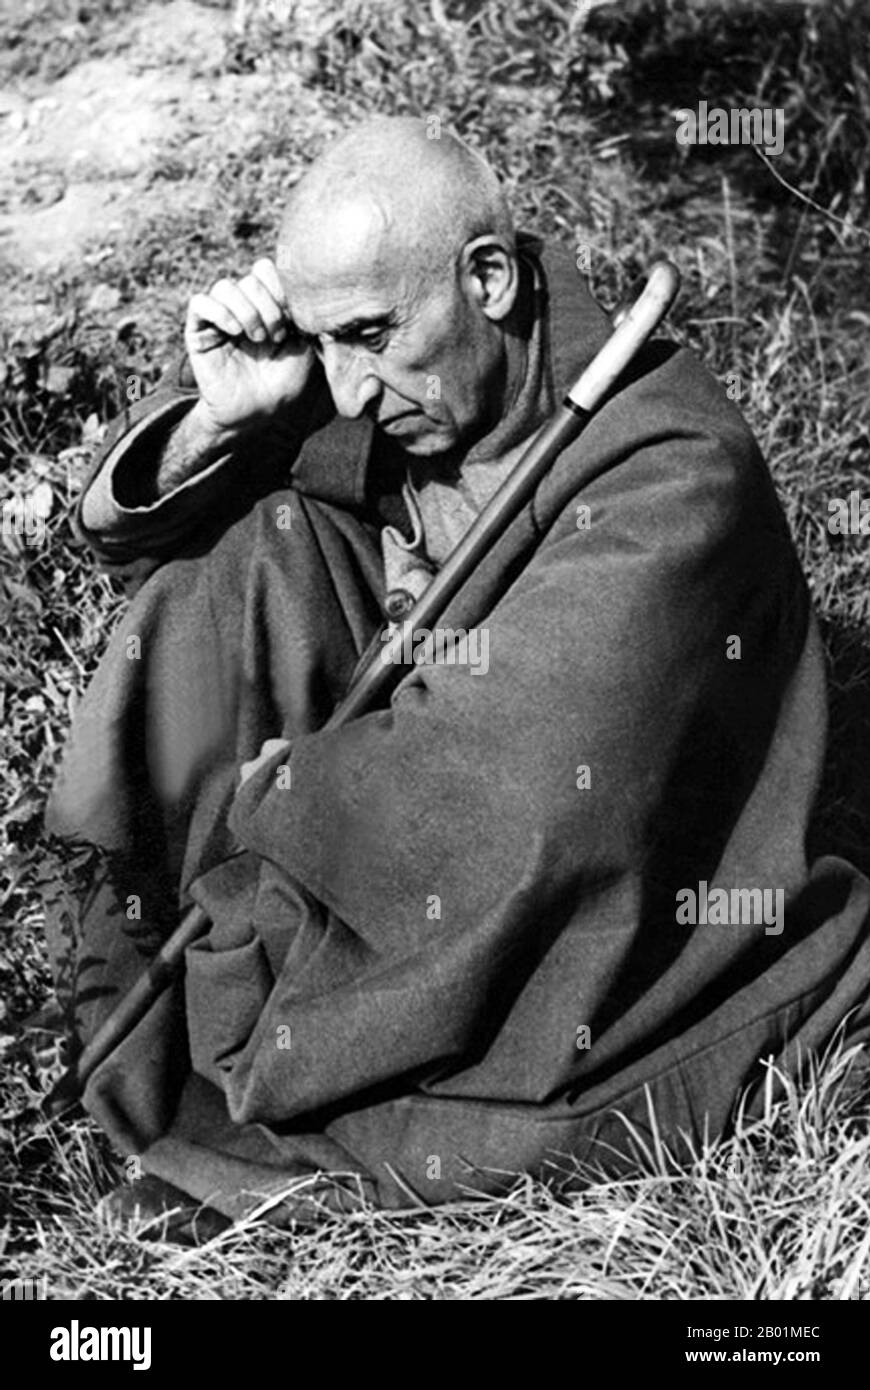 Iran/Persia: Mohammad Mosaddegh or Mosaddeq (16 June 1882 – 5 March 1967), Prime Minister of Iran from 1951 until being overthrown in a coup d'état in 1953. Ahmadabad, 1967.  The Mossadeq administration introduced a wide range of social reforms but was most notable for its nationalisation of the Iranian oil industry, which had been under British control since 1913 through the Anglo-Persian Oil Company.  Mosaddegh was removed from power in a coup on 19 August 1953, organised and carried out by the United States CIA at the request of British MI6. Stock Photo